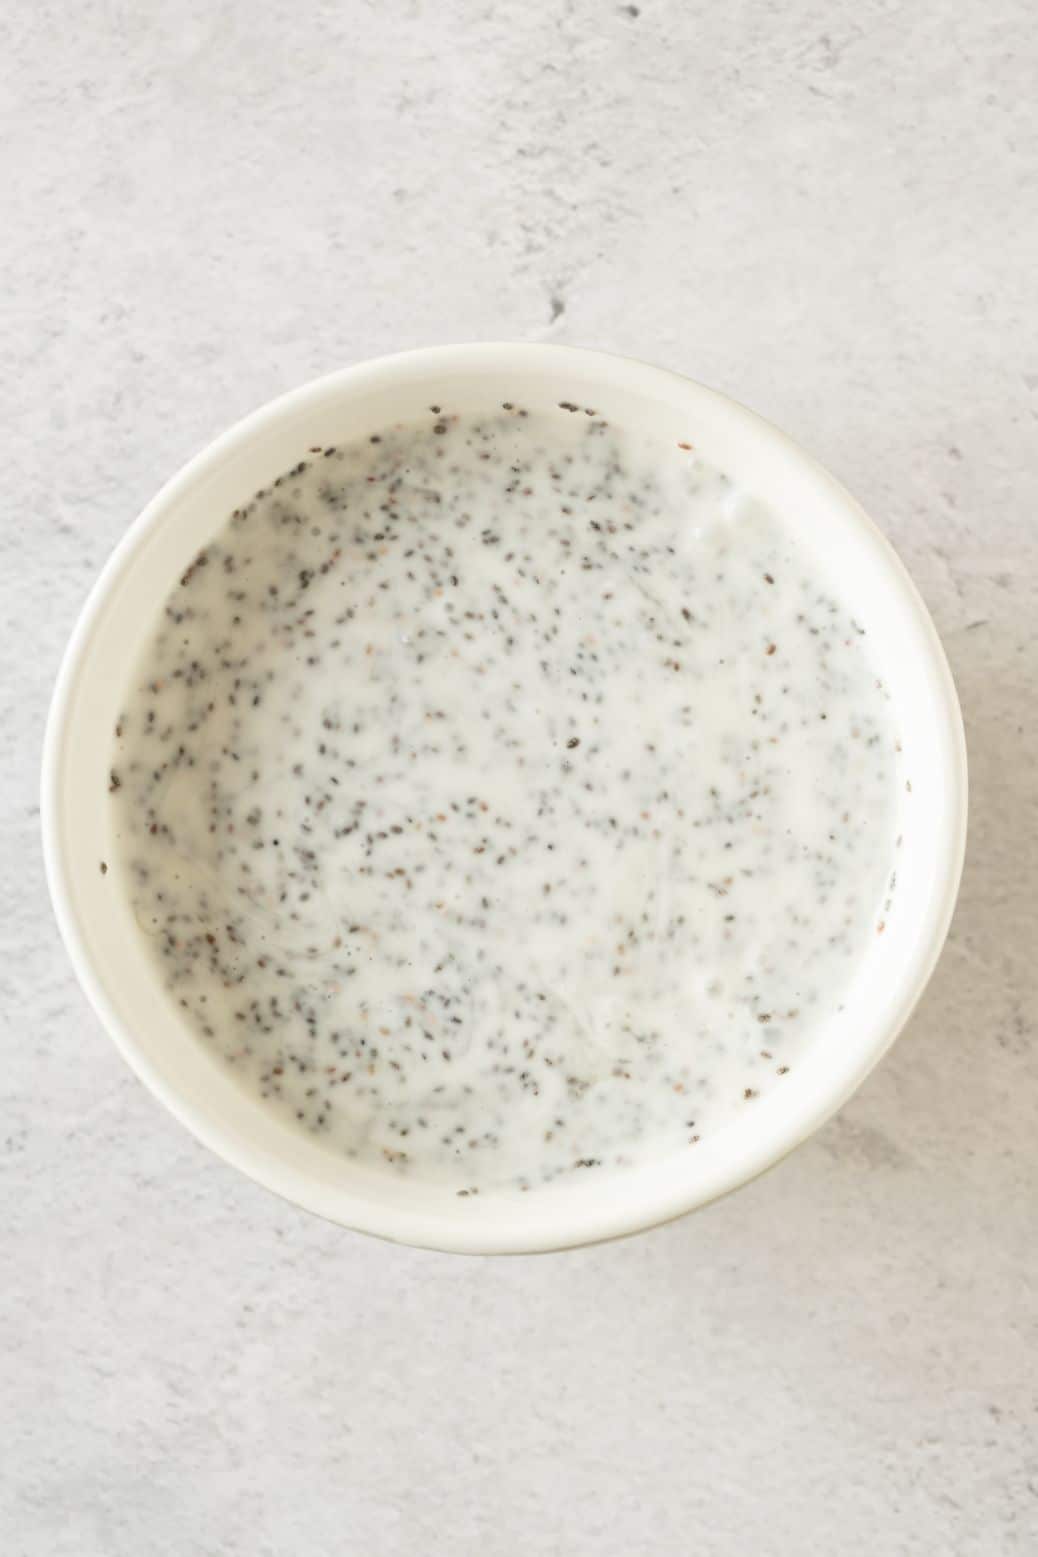 Chia seeds combined with coconut milk and honey to make a creamy pudding